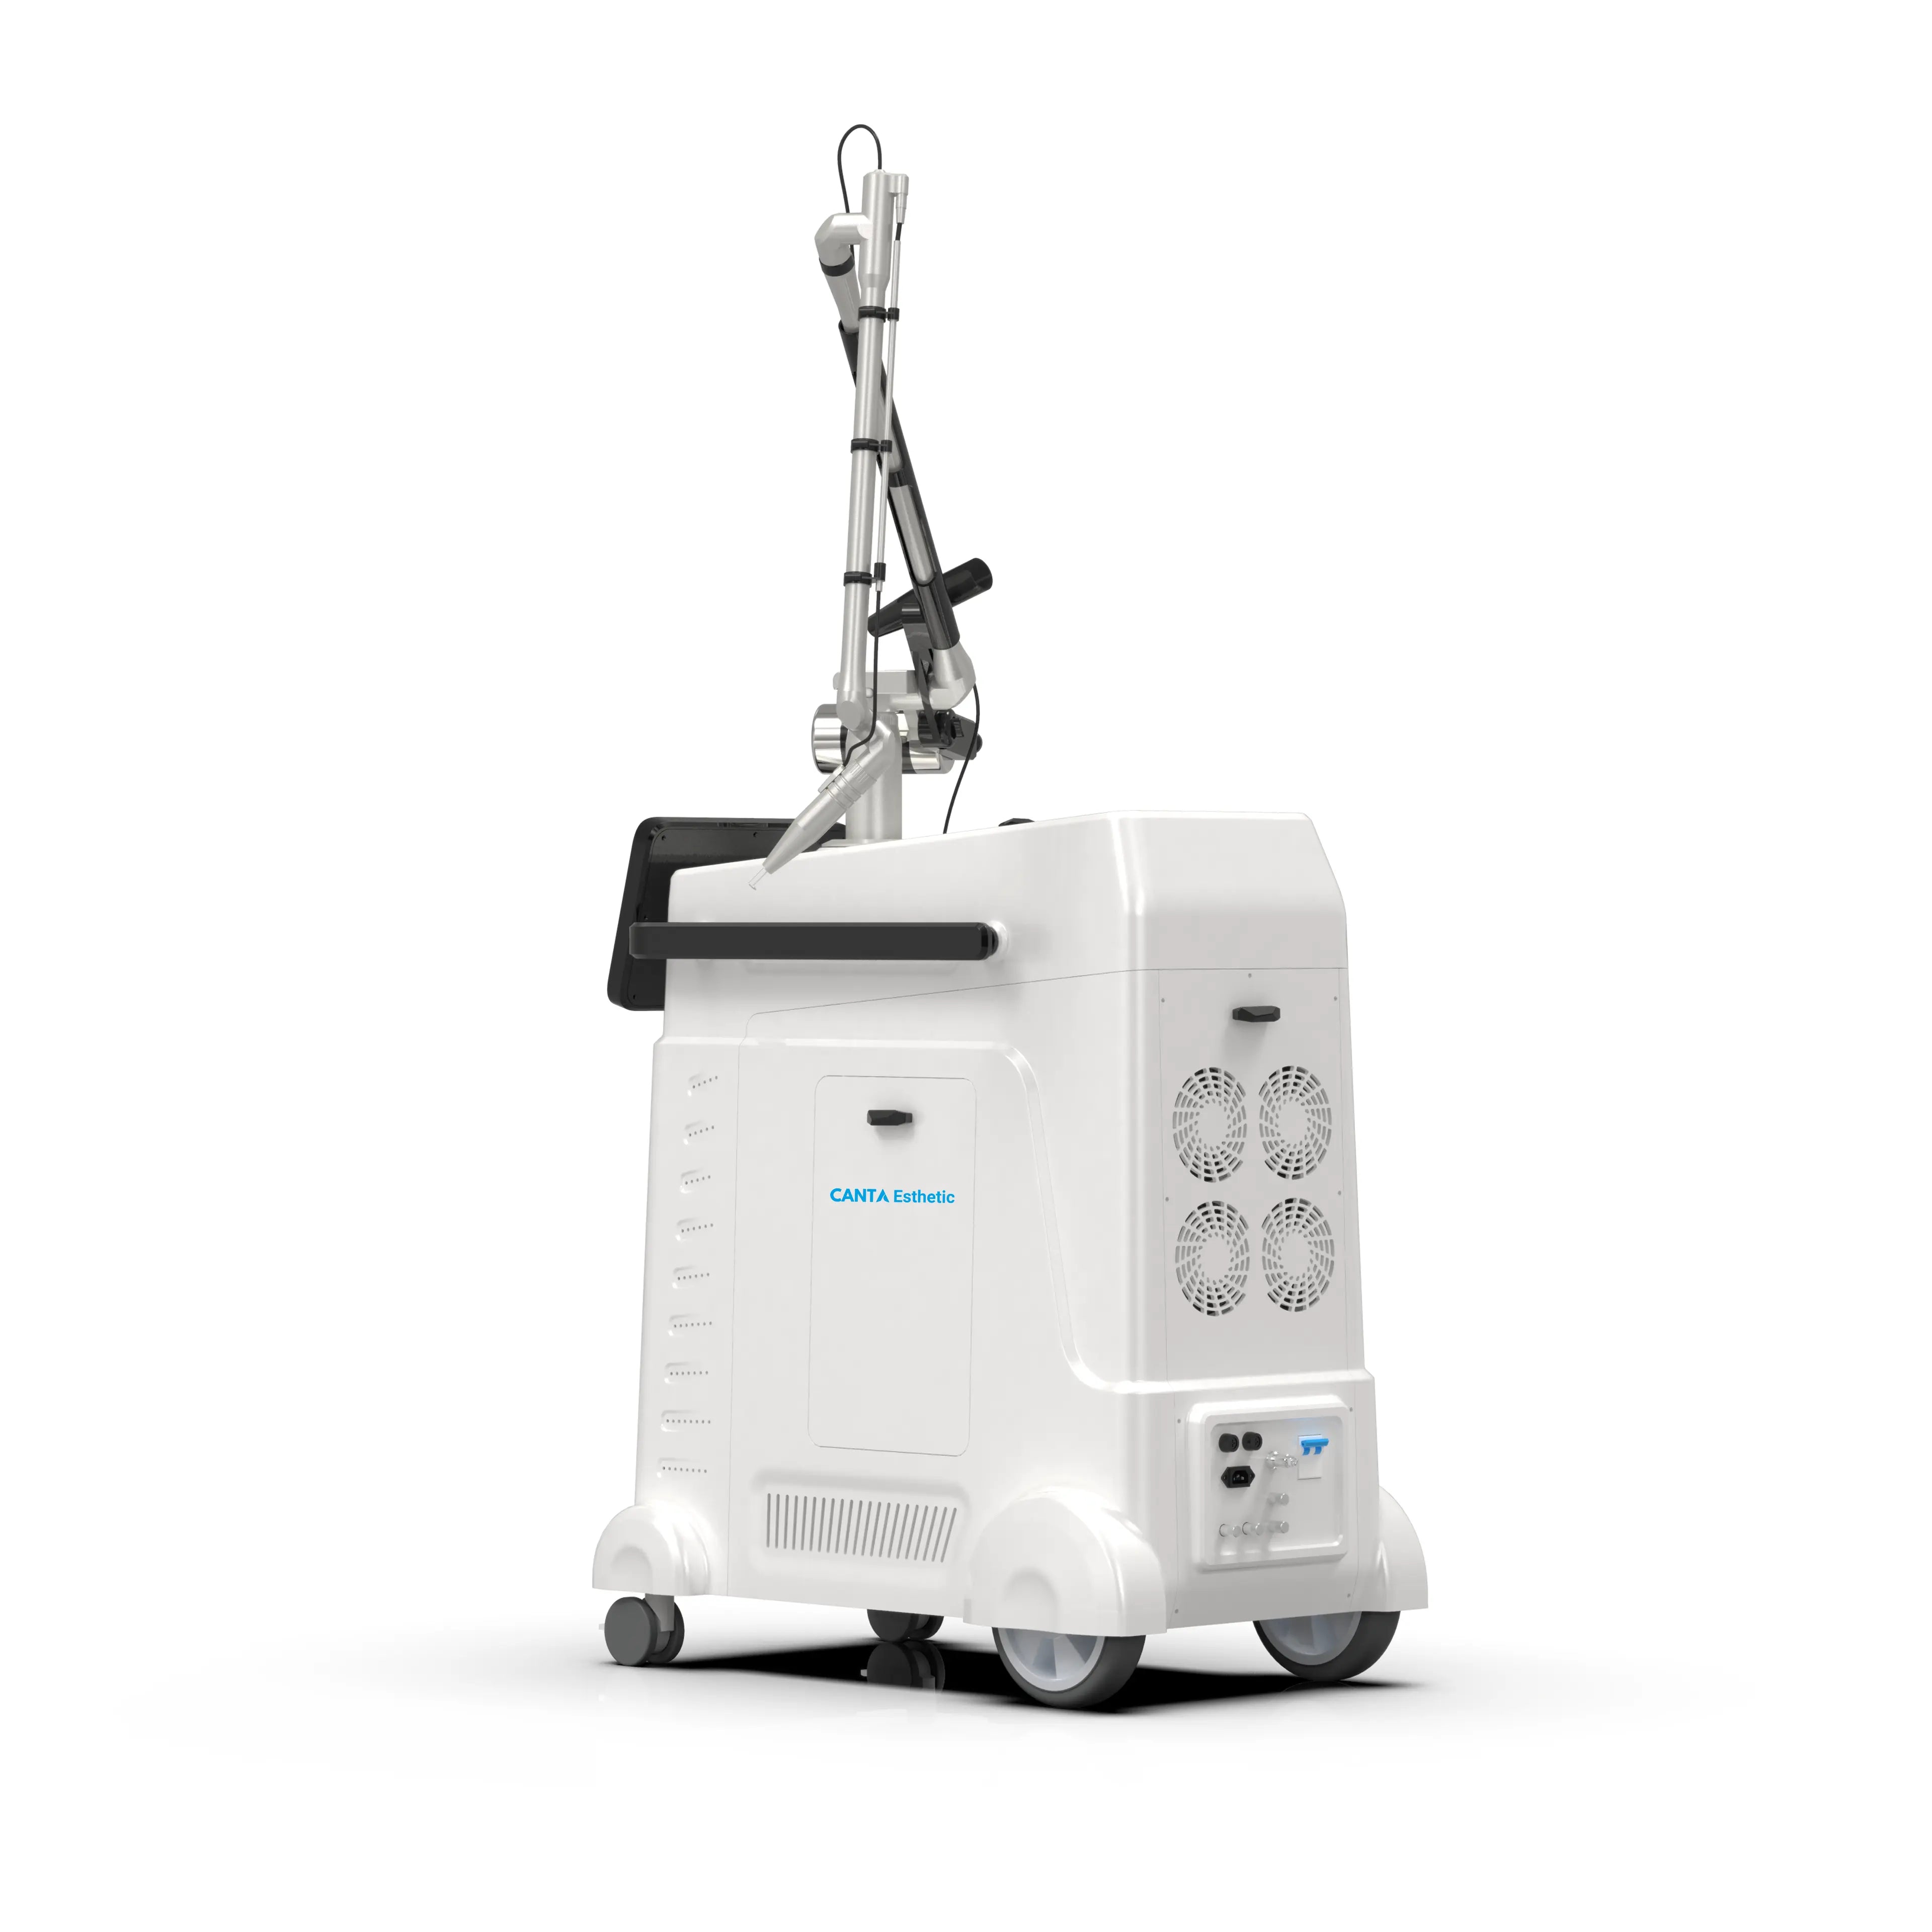 Q-Switched Laser Tattoo Removal Machine 4